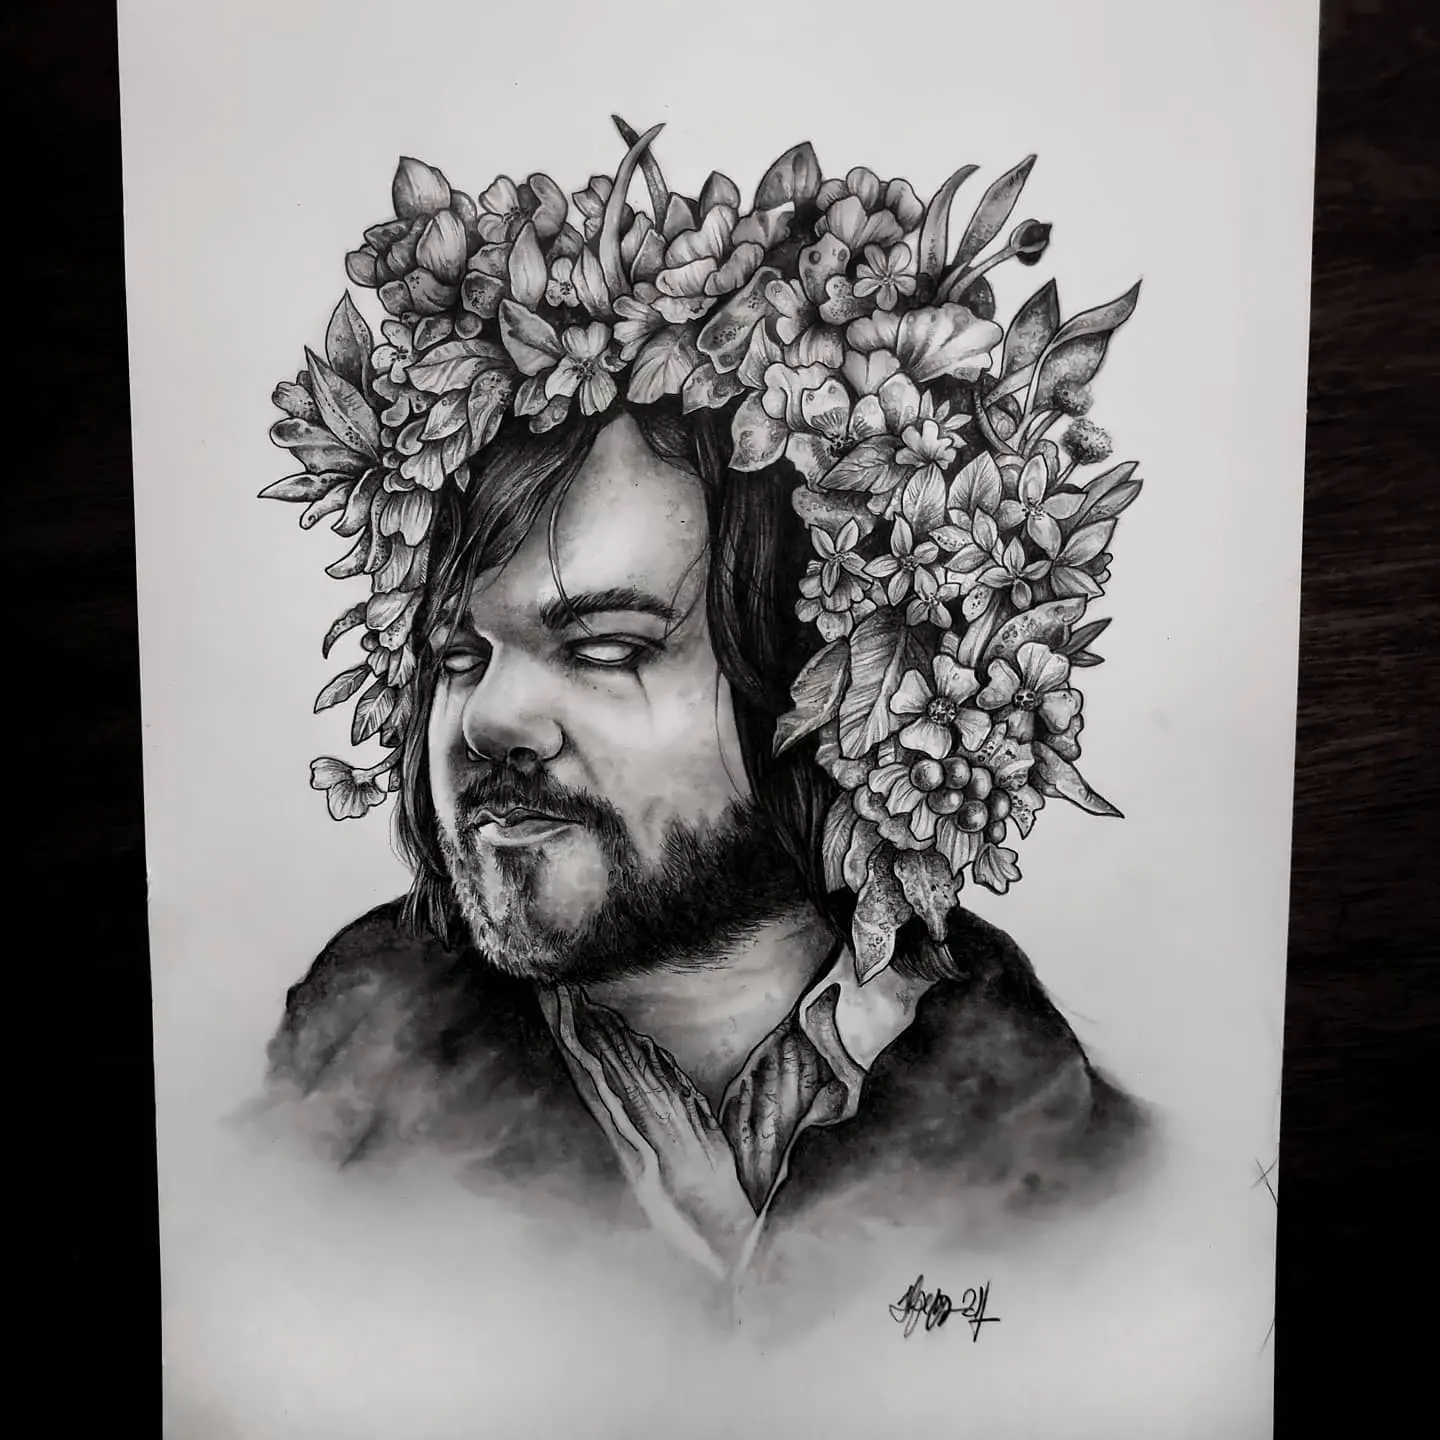 'Toast of Midsommar'. Combing two of my favourite things, weird cult film and Matt Berry! 💪🖤 It's been weeks since I've been able to draw anything, this was cathartic to say the least! 💀💀💀
.
.
.
.
.
.
.
.
                       thedarkestwork onlythedarkest darkartists blxckink blacktattoomag wiccac darkartistries